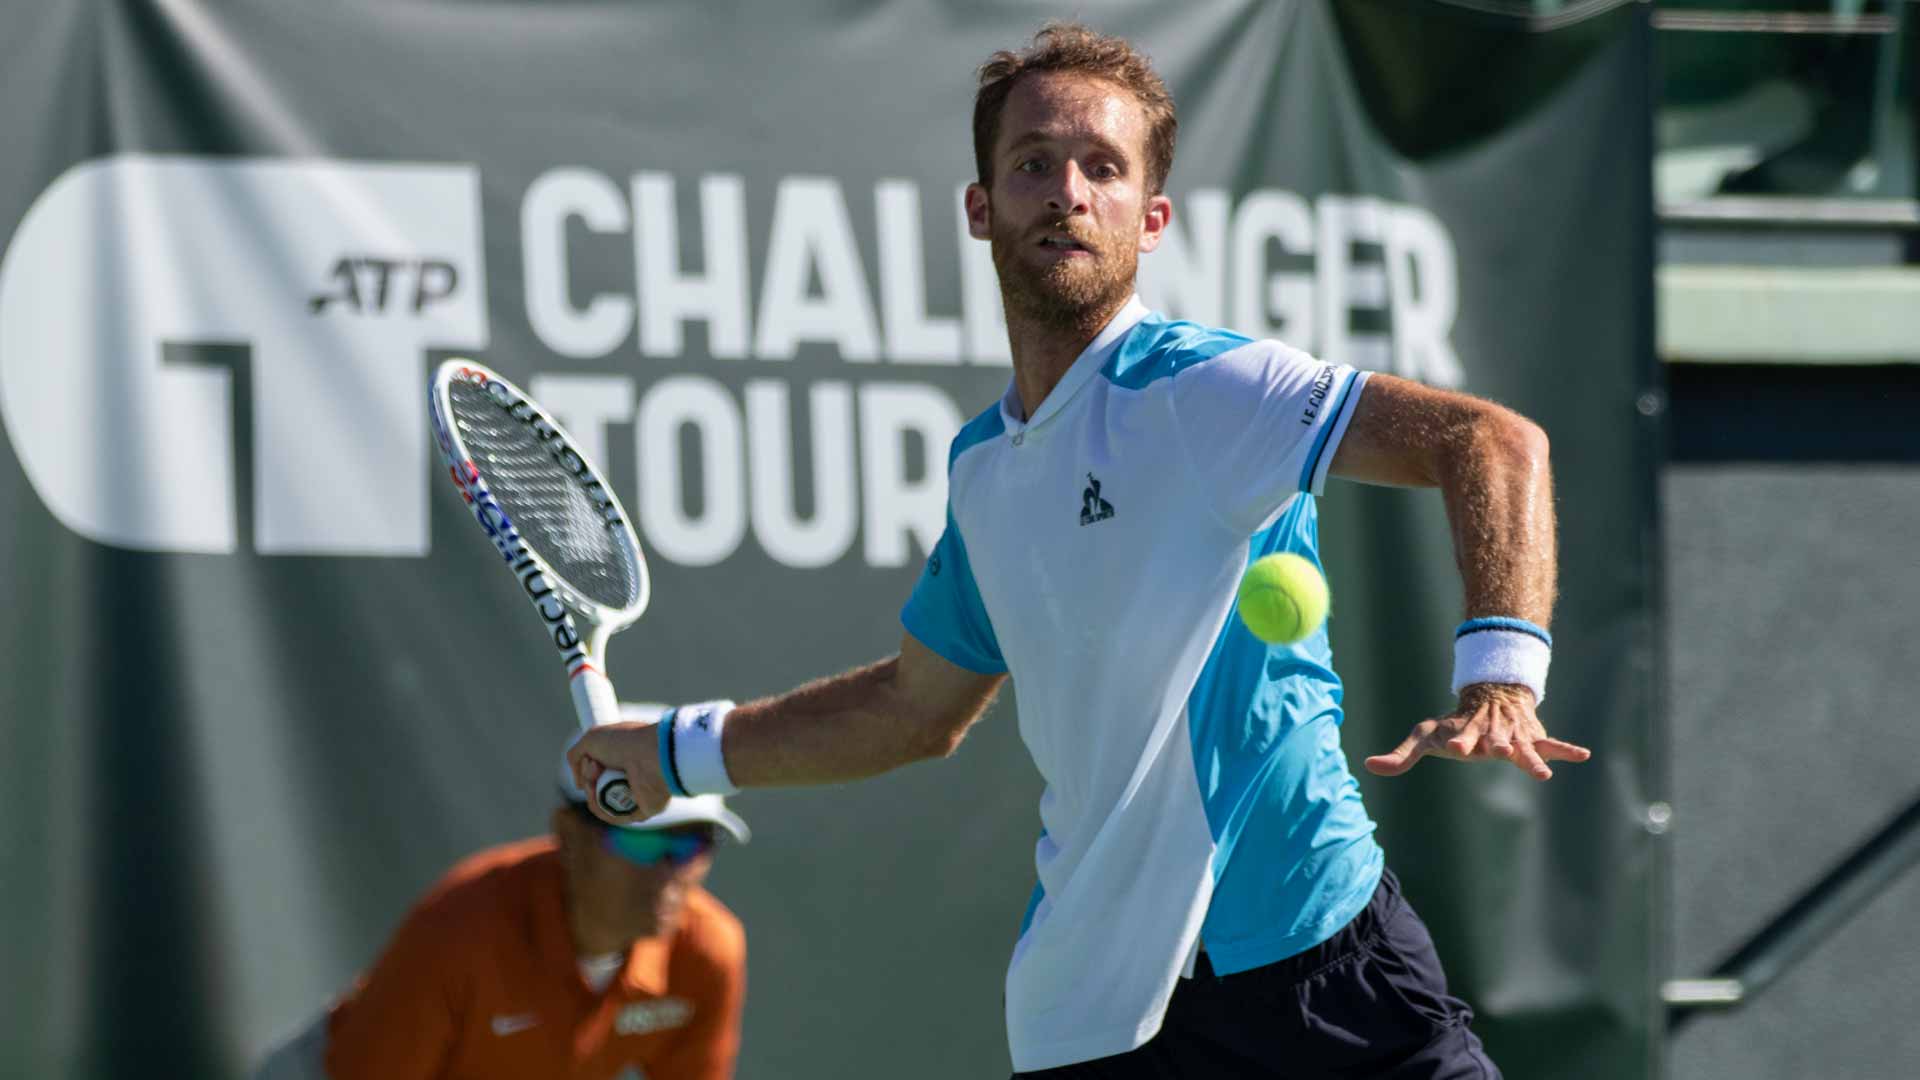 Constant Lestienne wins the Challenger 125 event in Stanford, California.